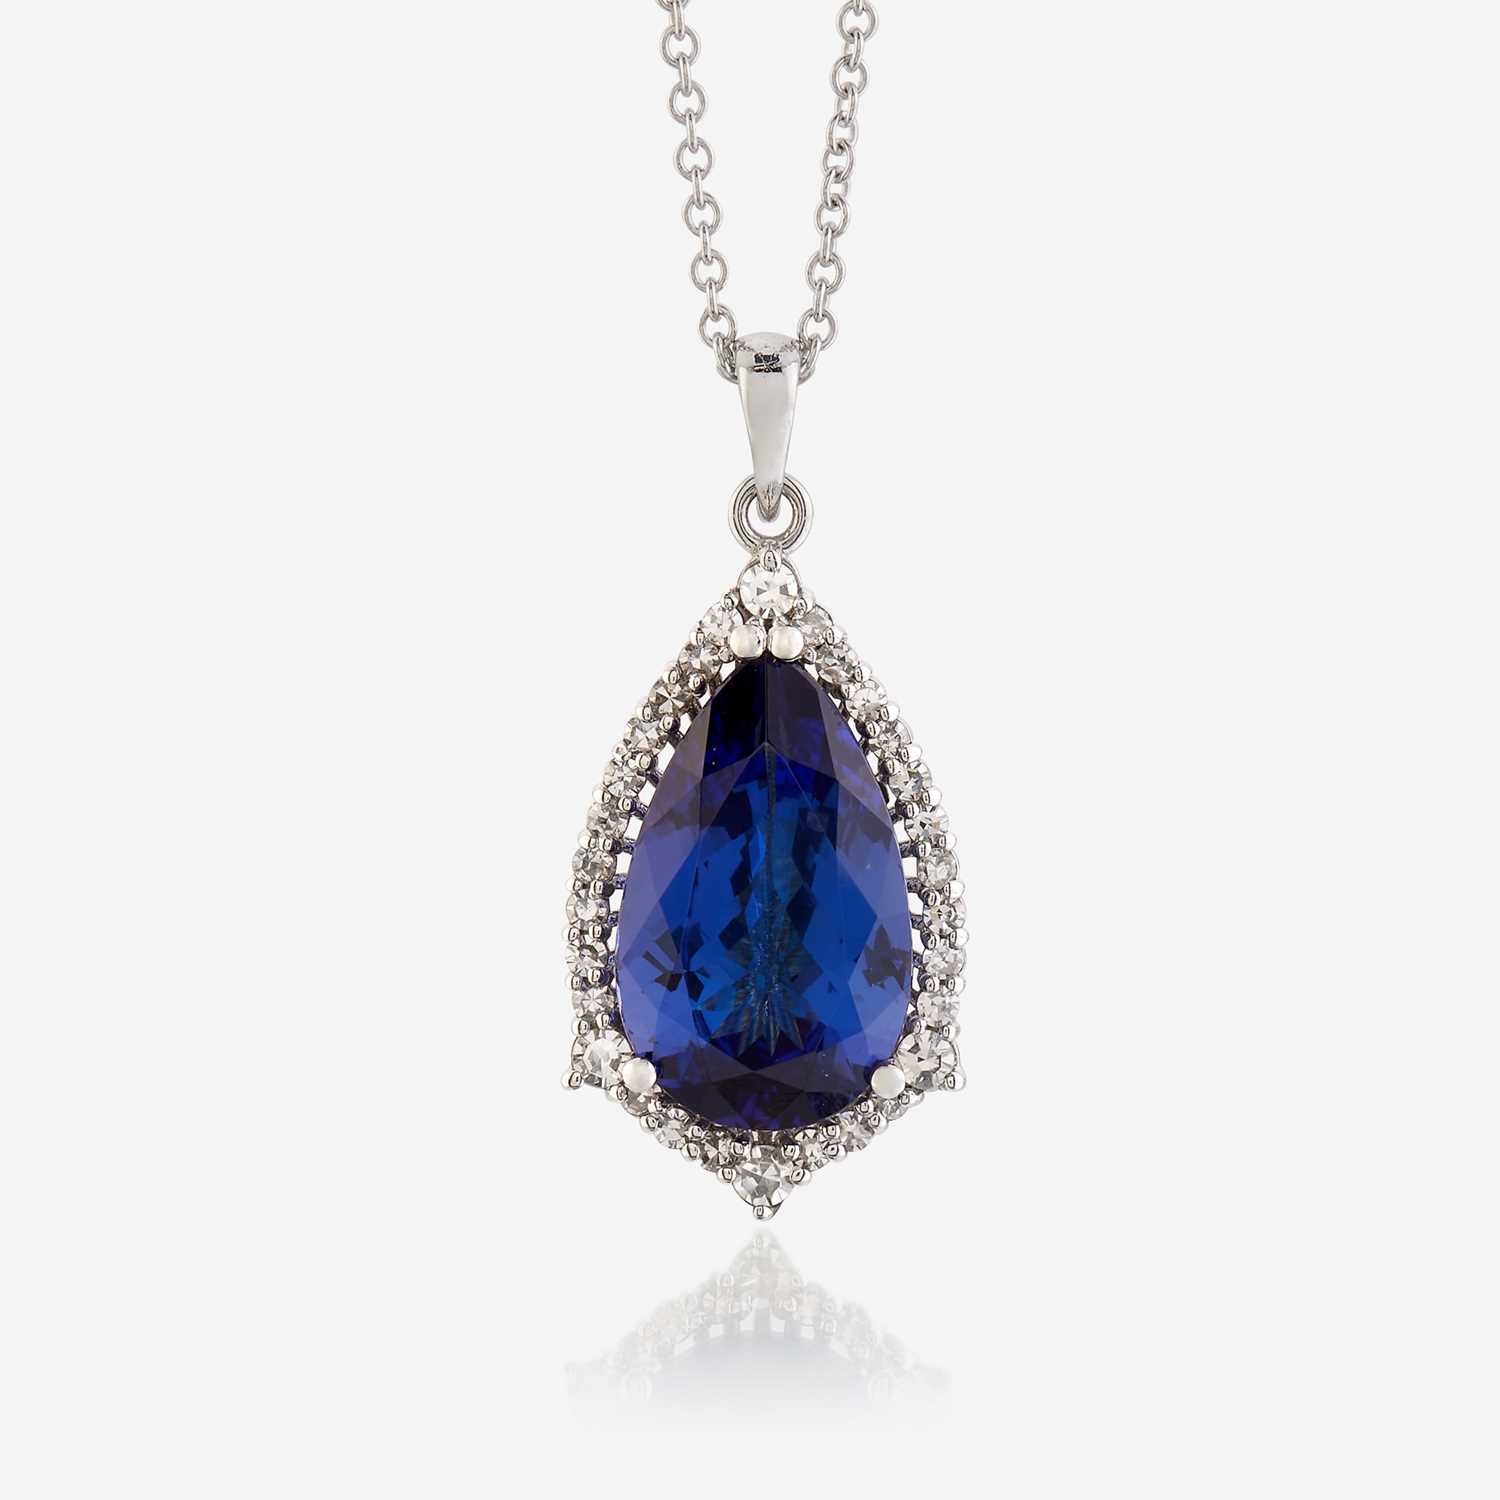 Lot 79 - A tanzanite, diamond, and eighteen karat white gold pendant and necklace